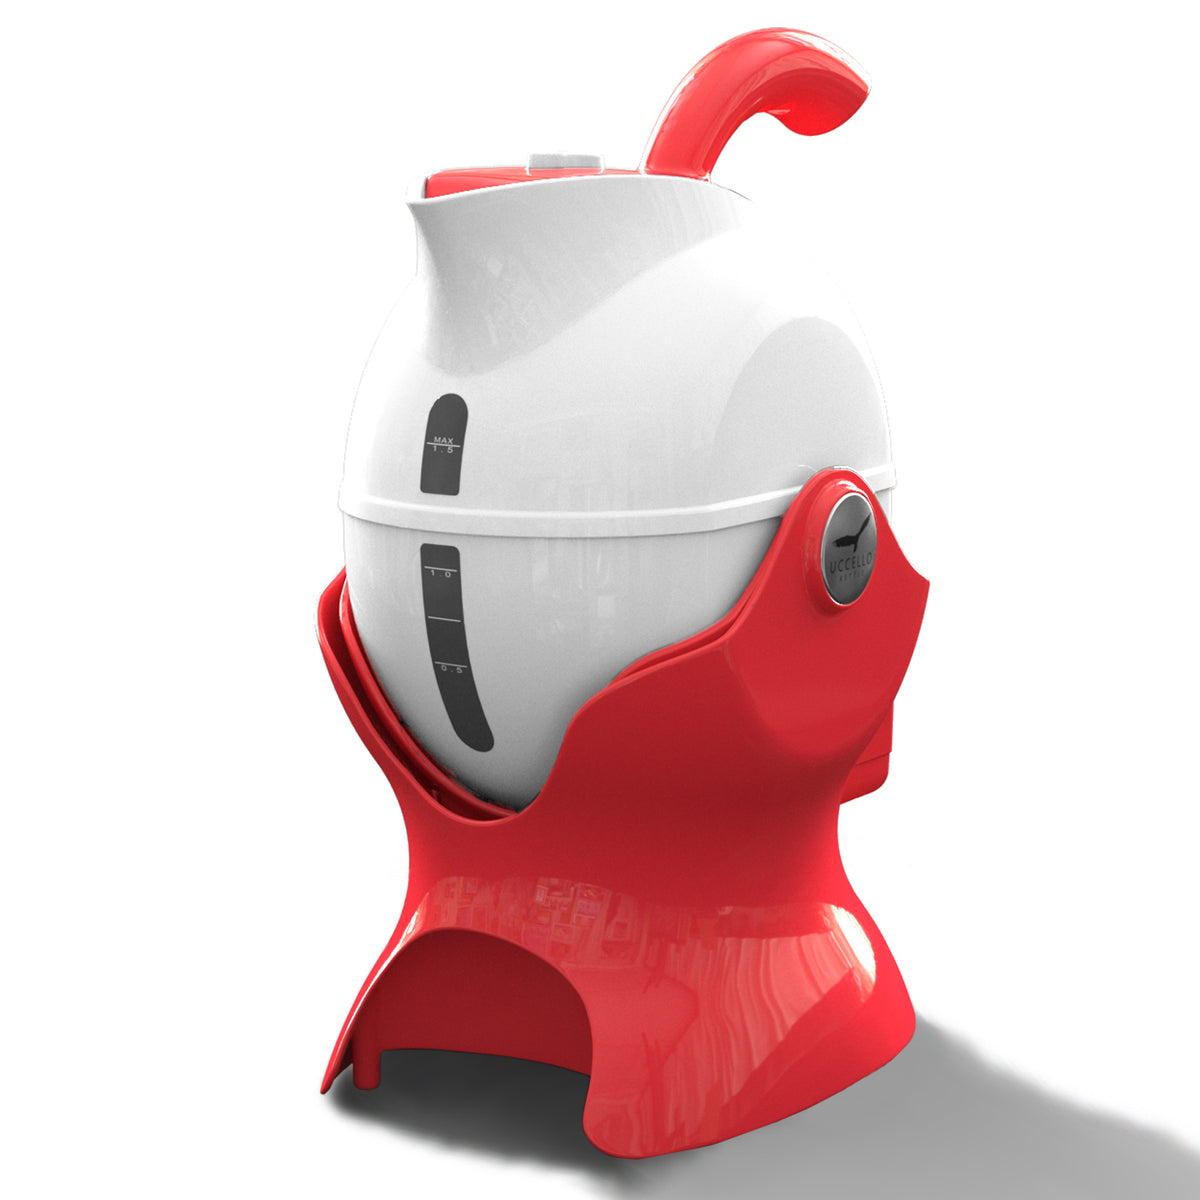 Tilt-to-pour Uccello Kettle - red